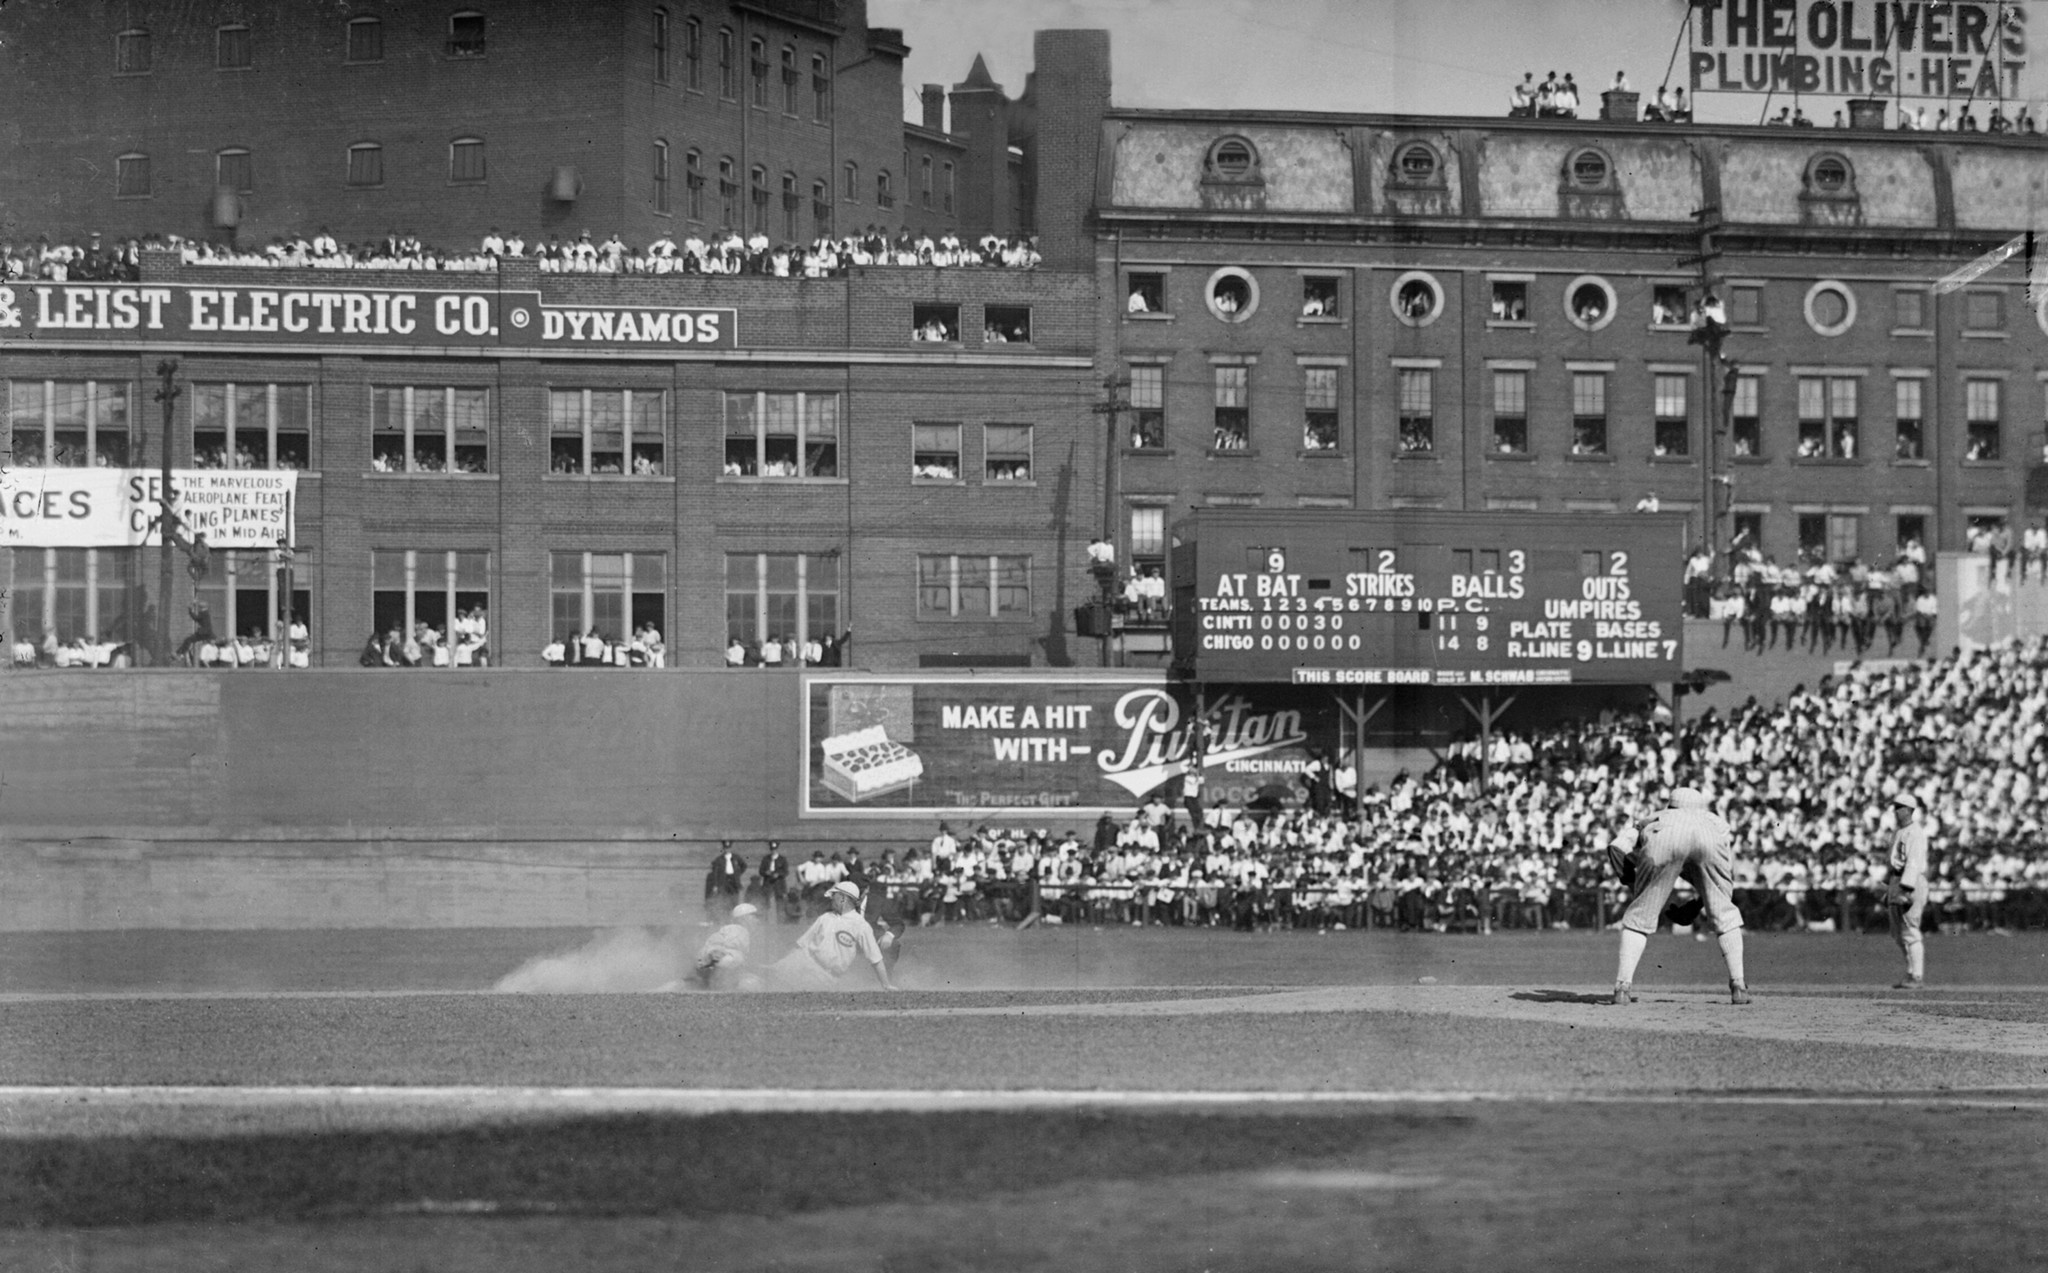 The Black Sox Scandal of 1919 – Trying to Teach about Cheating